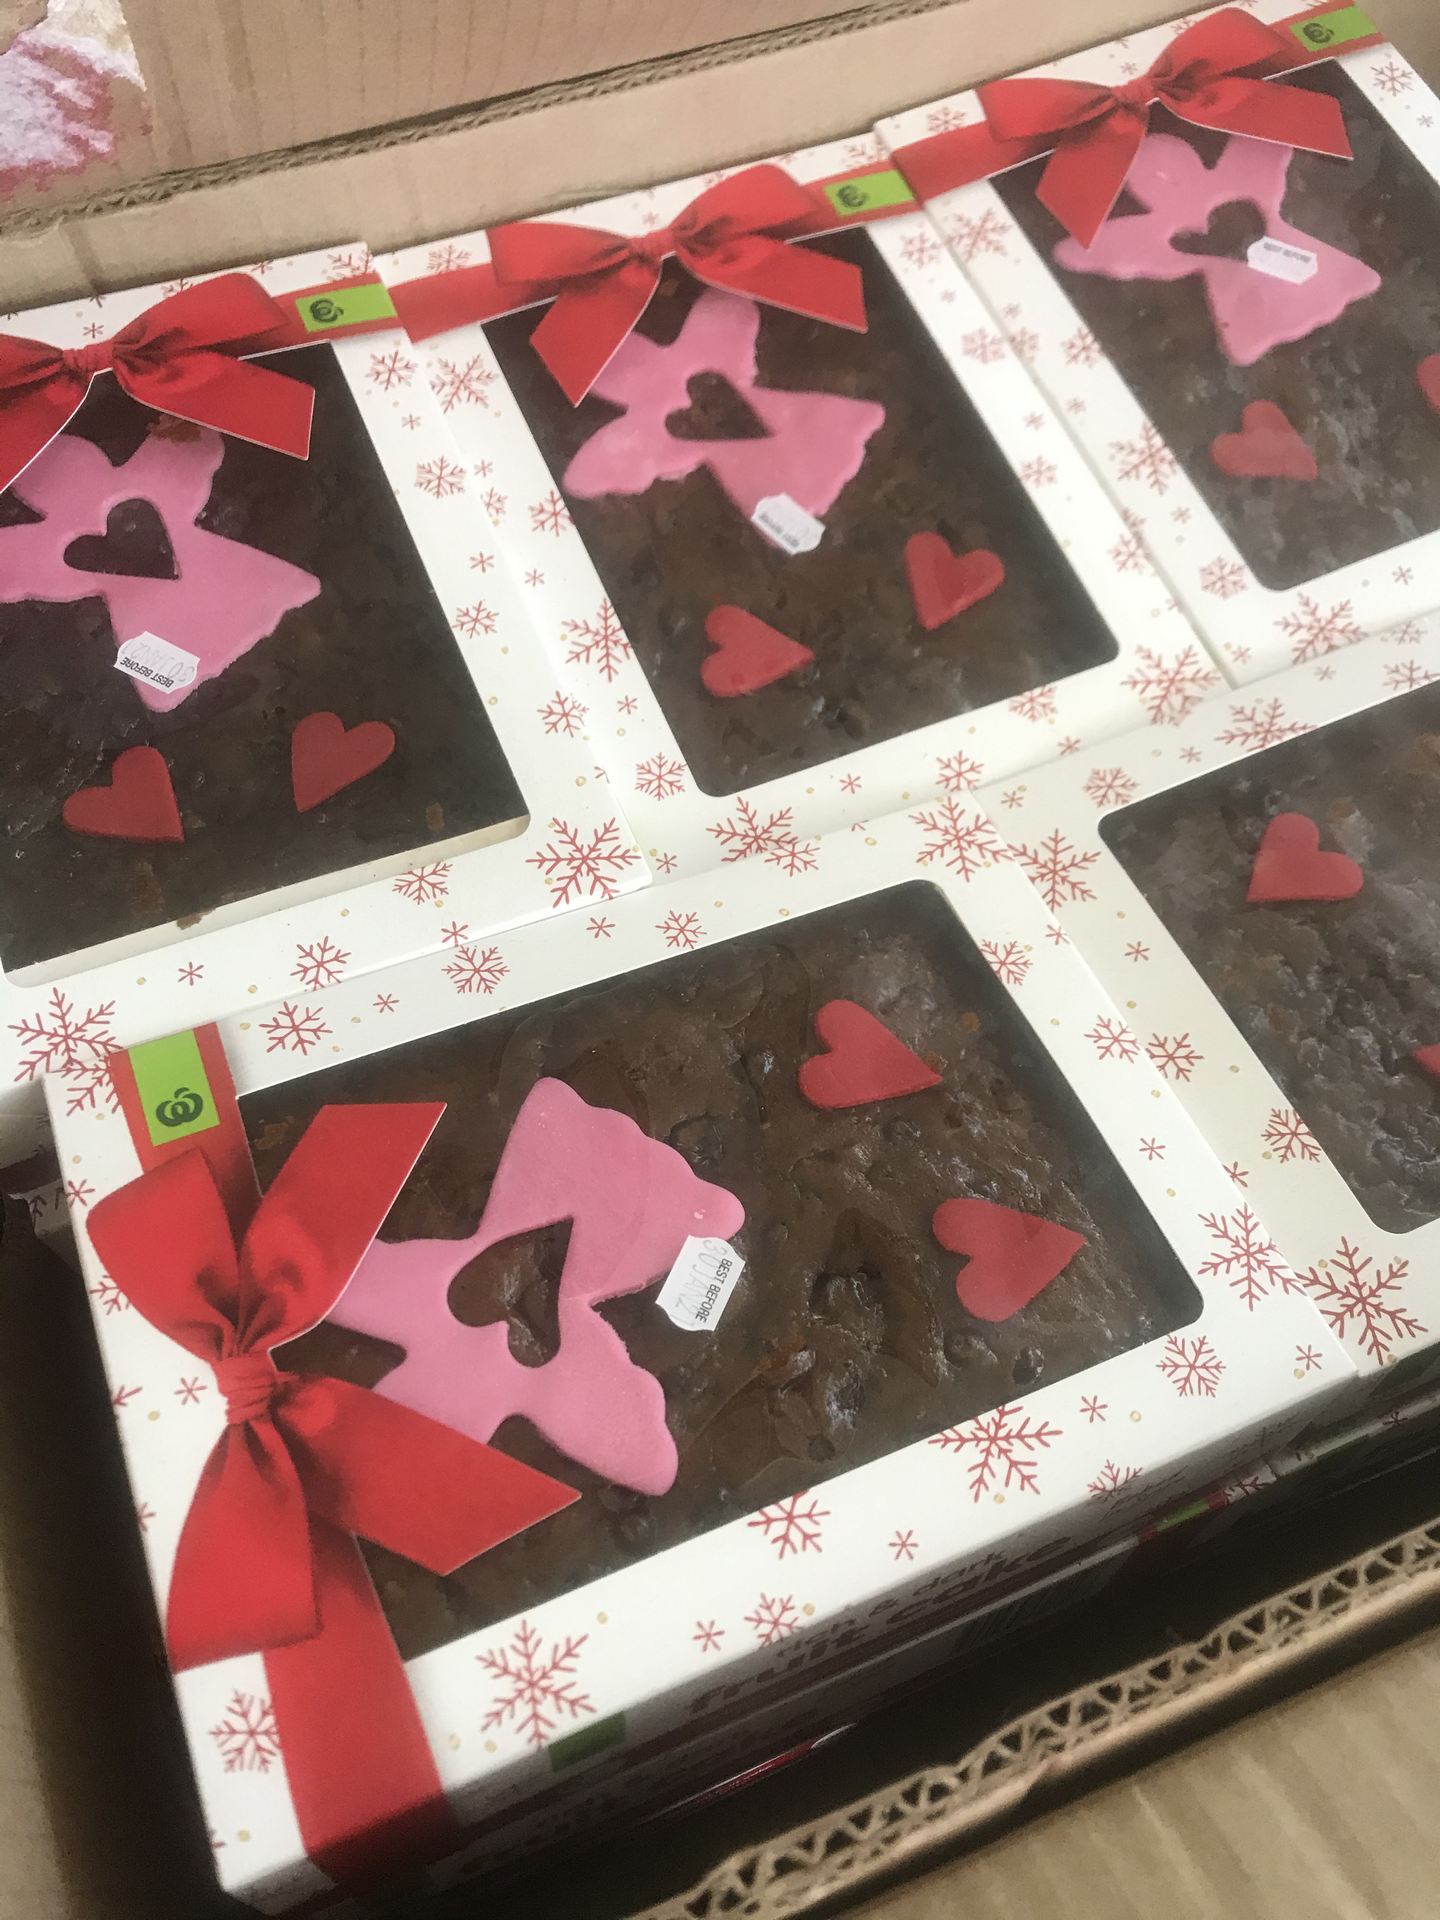 boxes of Christmas cakes with pink angels